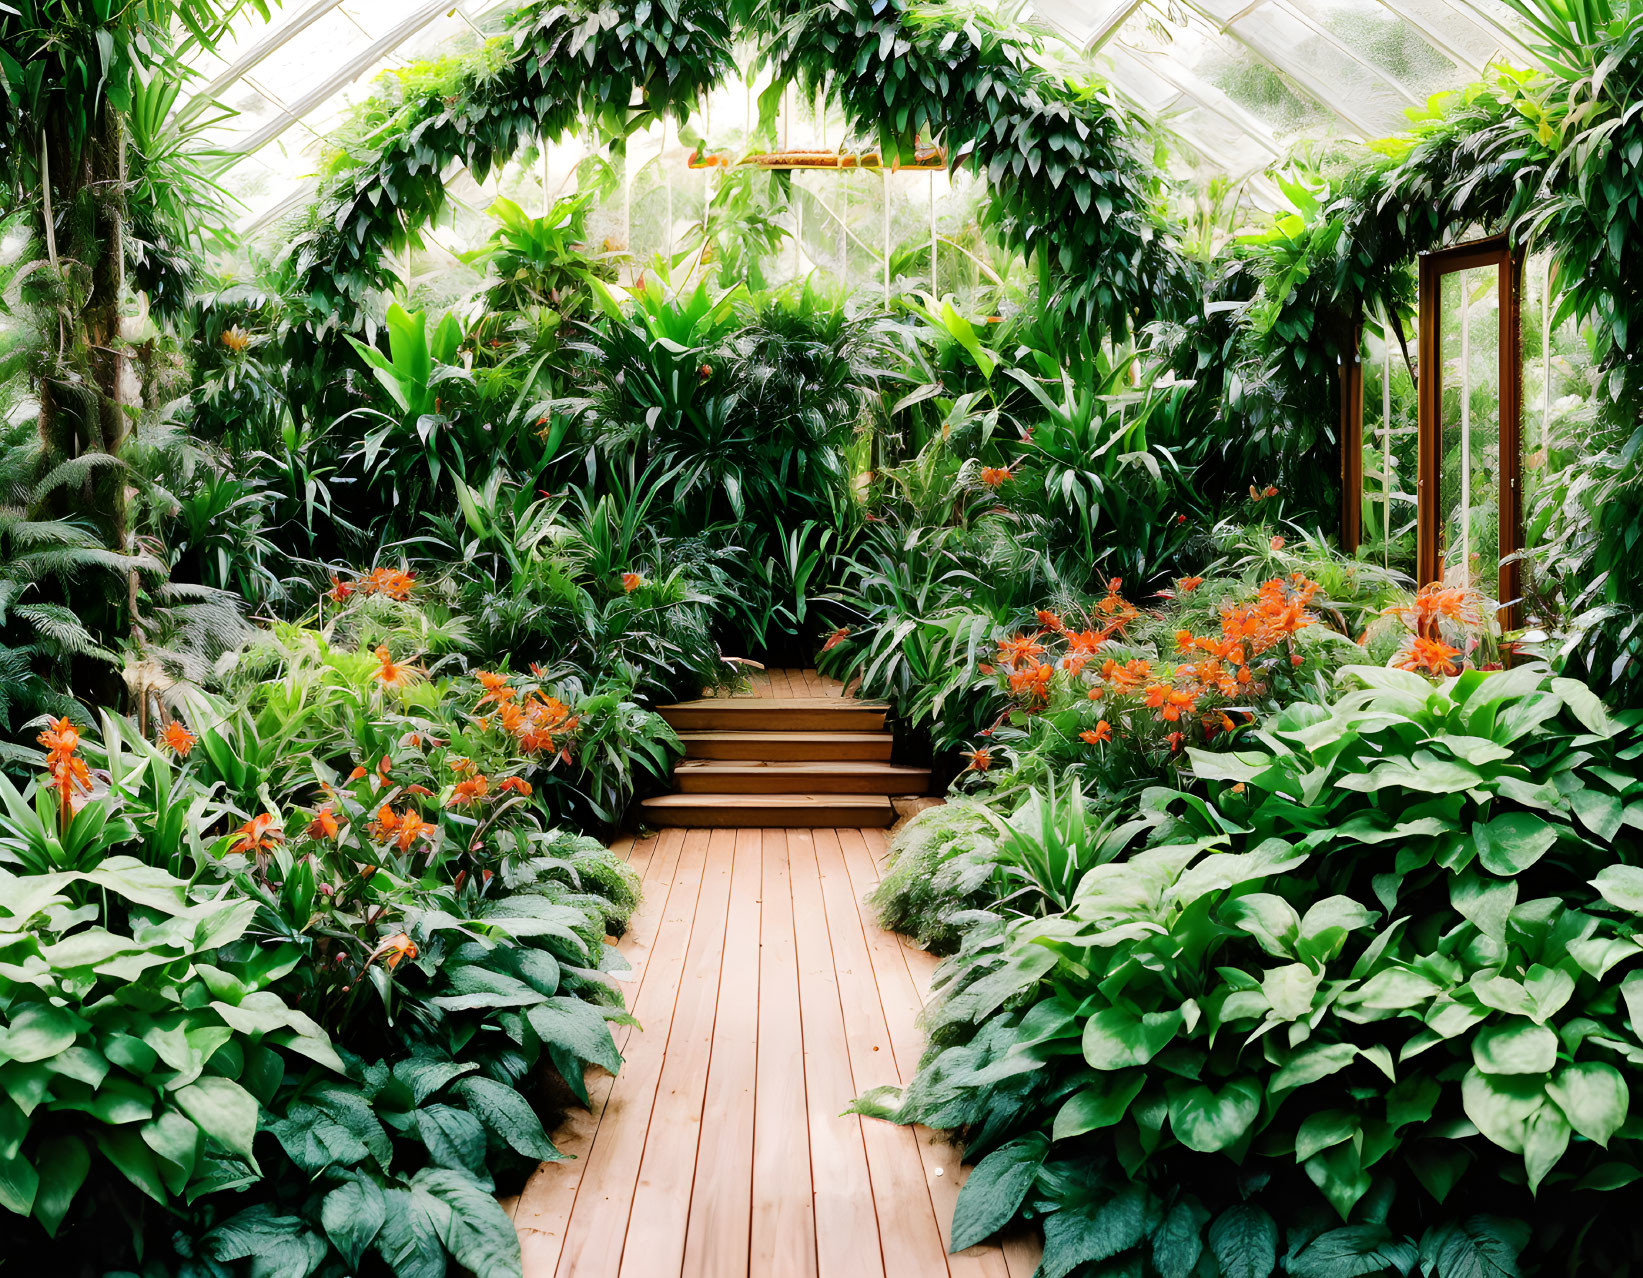 Greenhouse interior with wooden walkway and vibrant green plants and orange flowers.